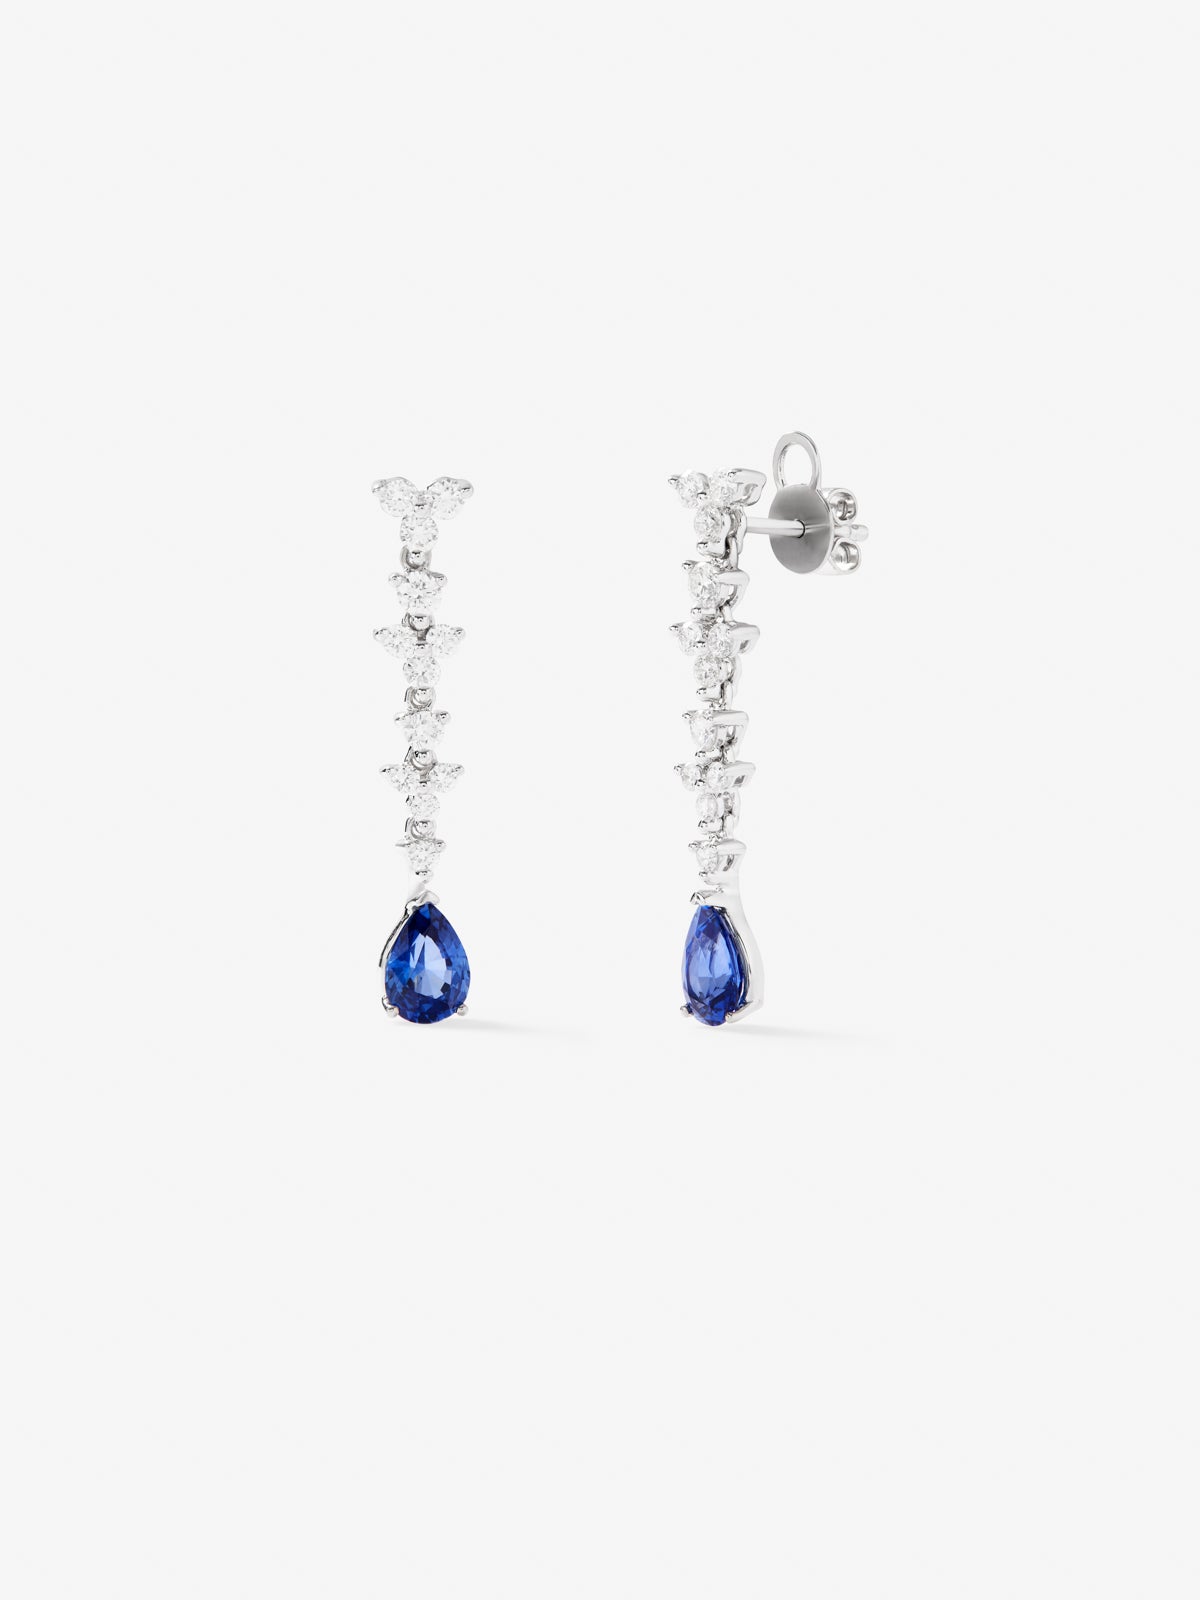 18K white gold earrings with 2 pear-cut blue sapphires of 1.82 cts and 24 brilliant-cut diamonds with a total of 0.86 cts